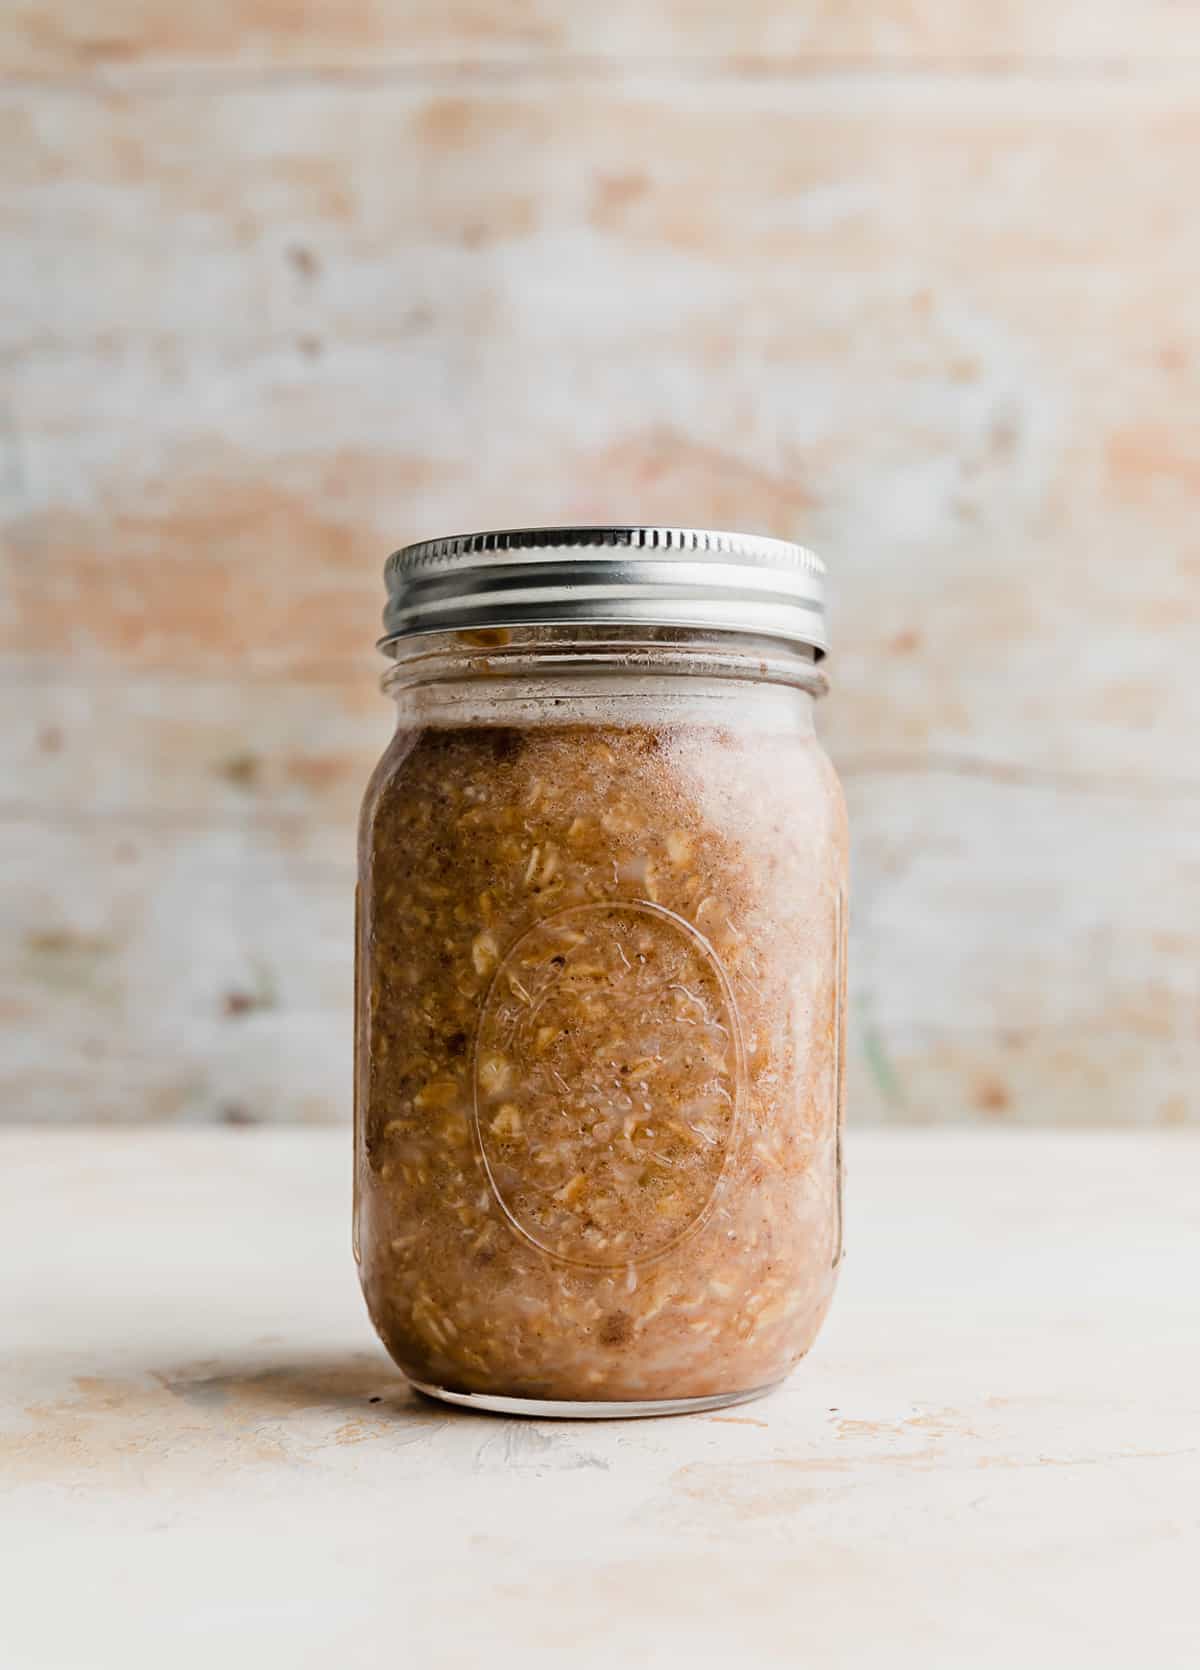 A glass jar full of light brown High Protein Overnight Oats with a metal lid on top.